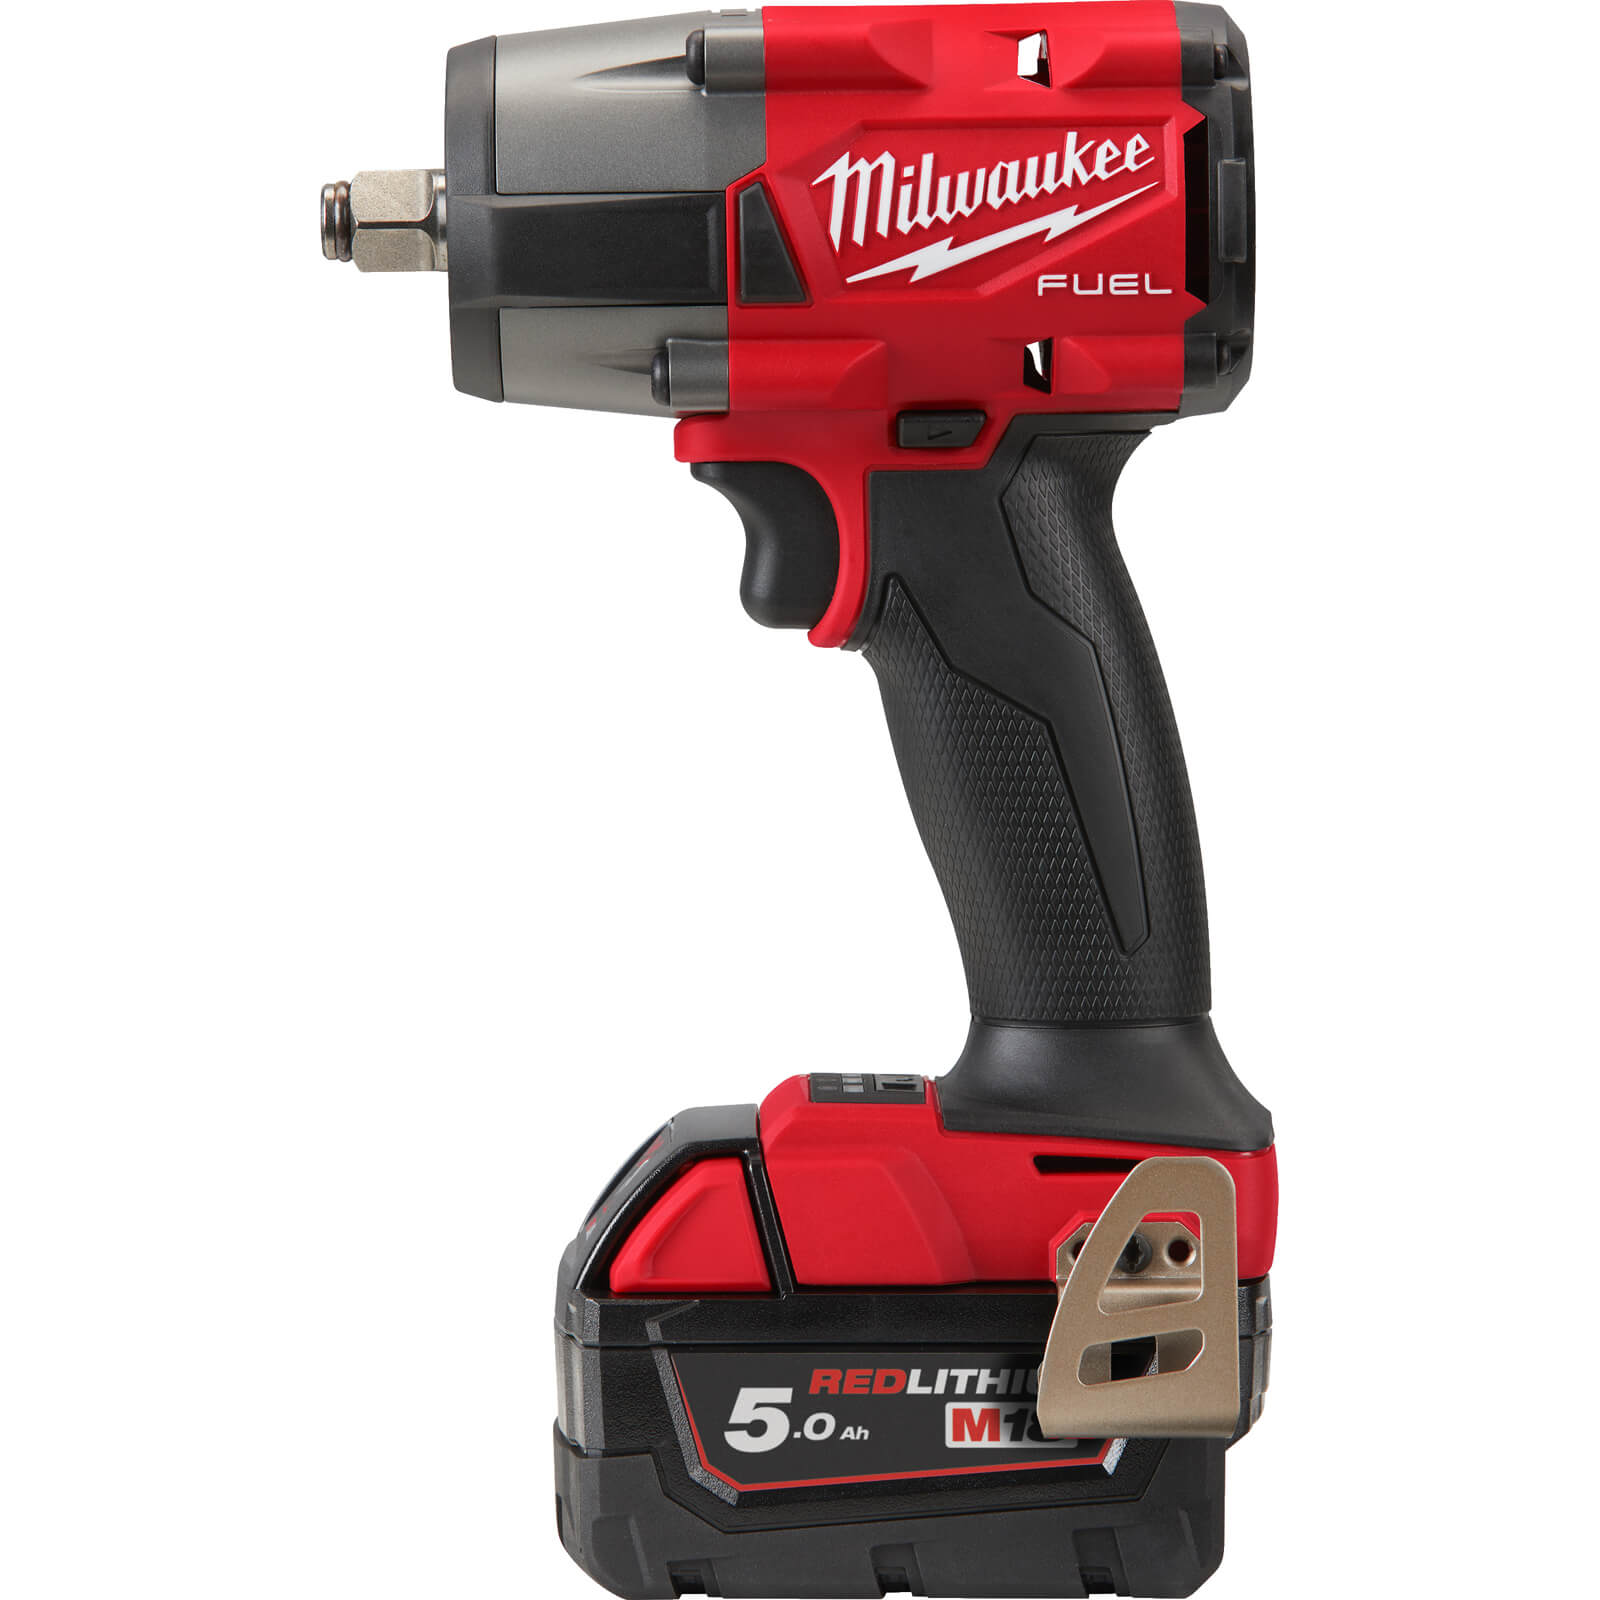 Image of Milwaukee M18 FMTIW2F12 Fuel 18v Cordless Brushless 1/2" Drive Impact Wrench 2 x 5ah Li-ion Charger Case